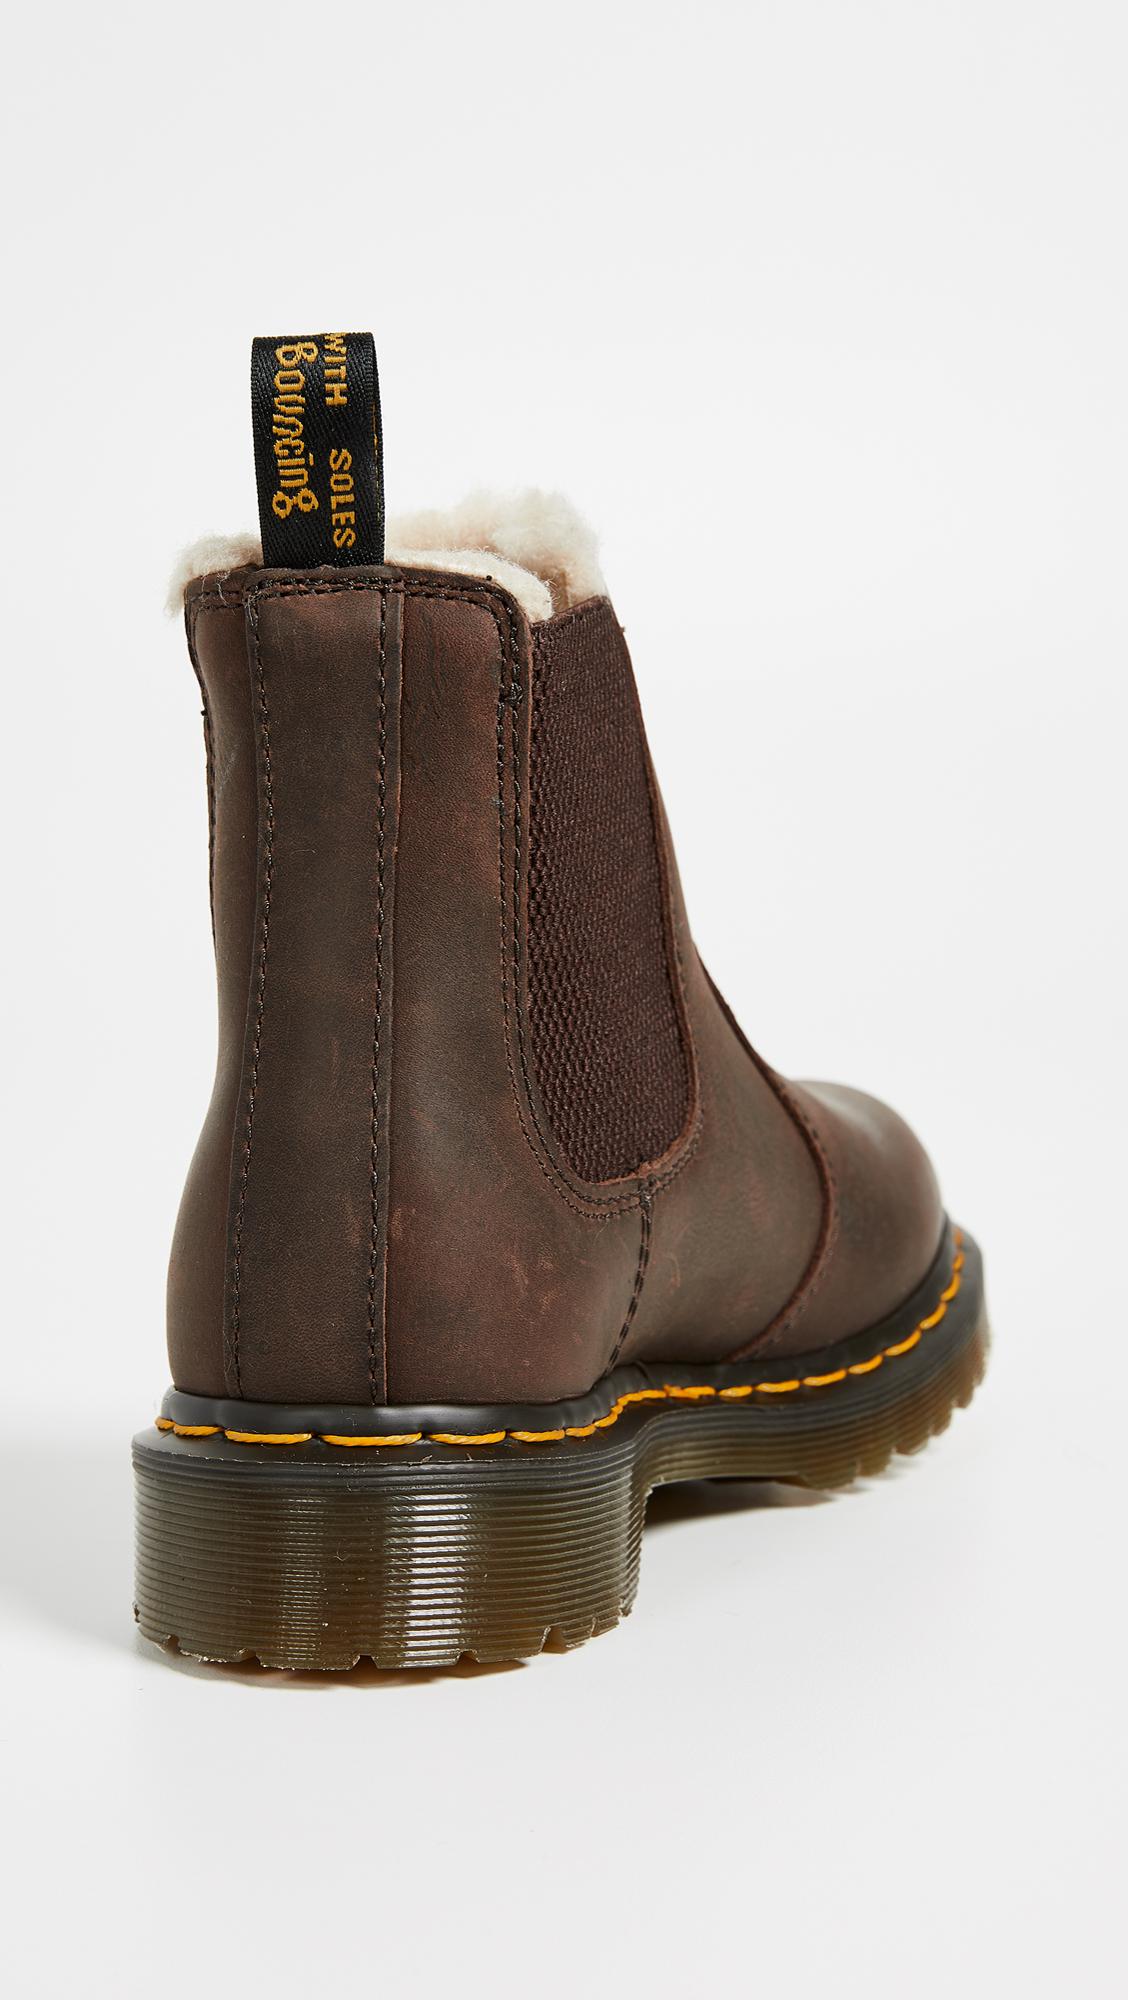 Dr. Martens Leonore Sherpa Chelsea Boots in Dark Brown (Brown) - Lyst